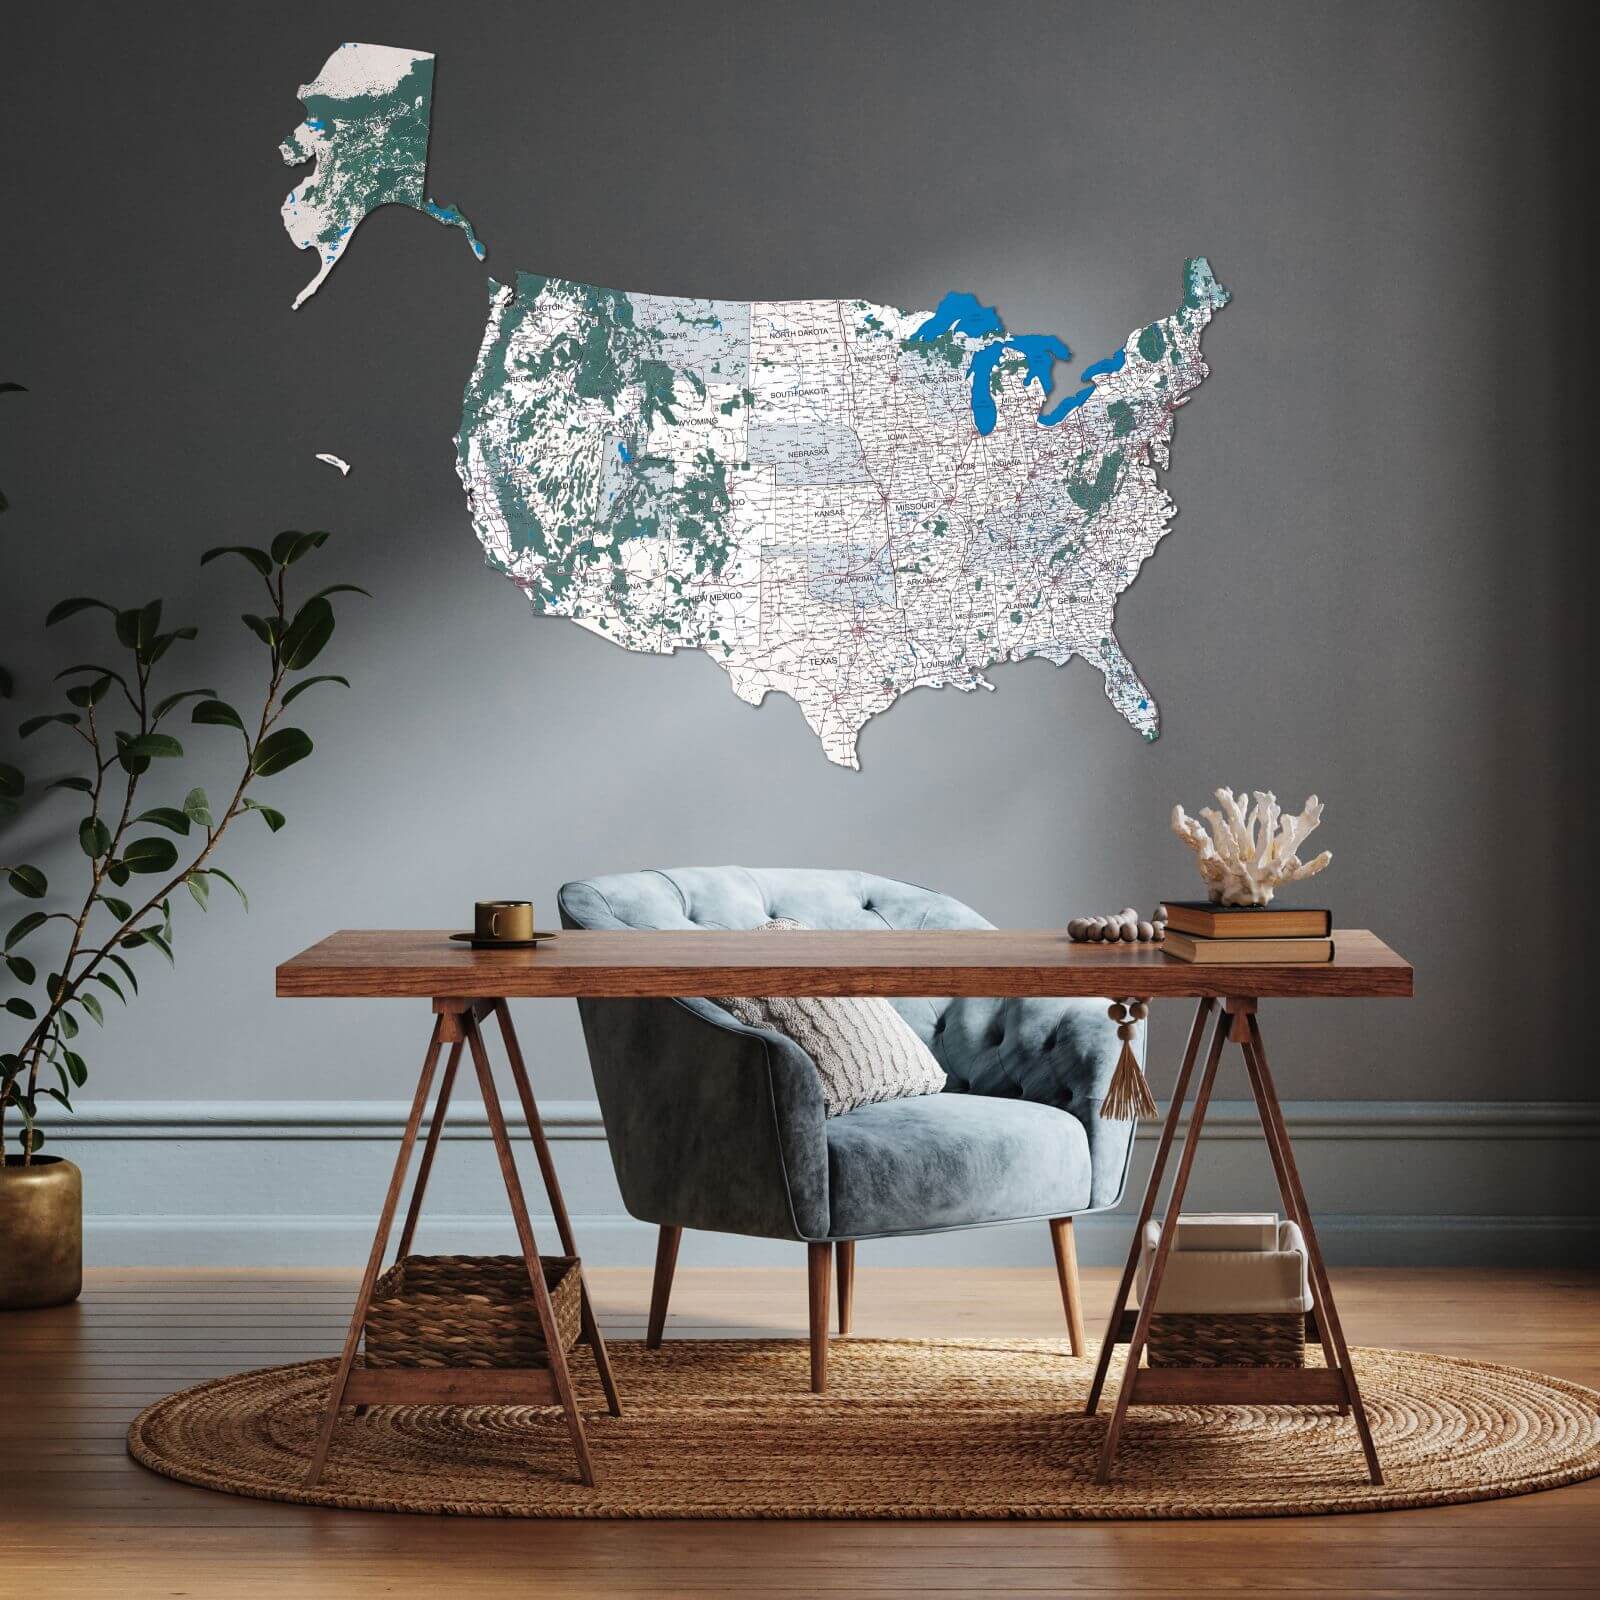 ENJOY THE WOOD 3D Wood World Map Wall Art Large Wood Wall Décor  Housewarming Gift Idea Wood Wall Art World Travel Map For Home & Kitchen or  Office